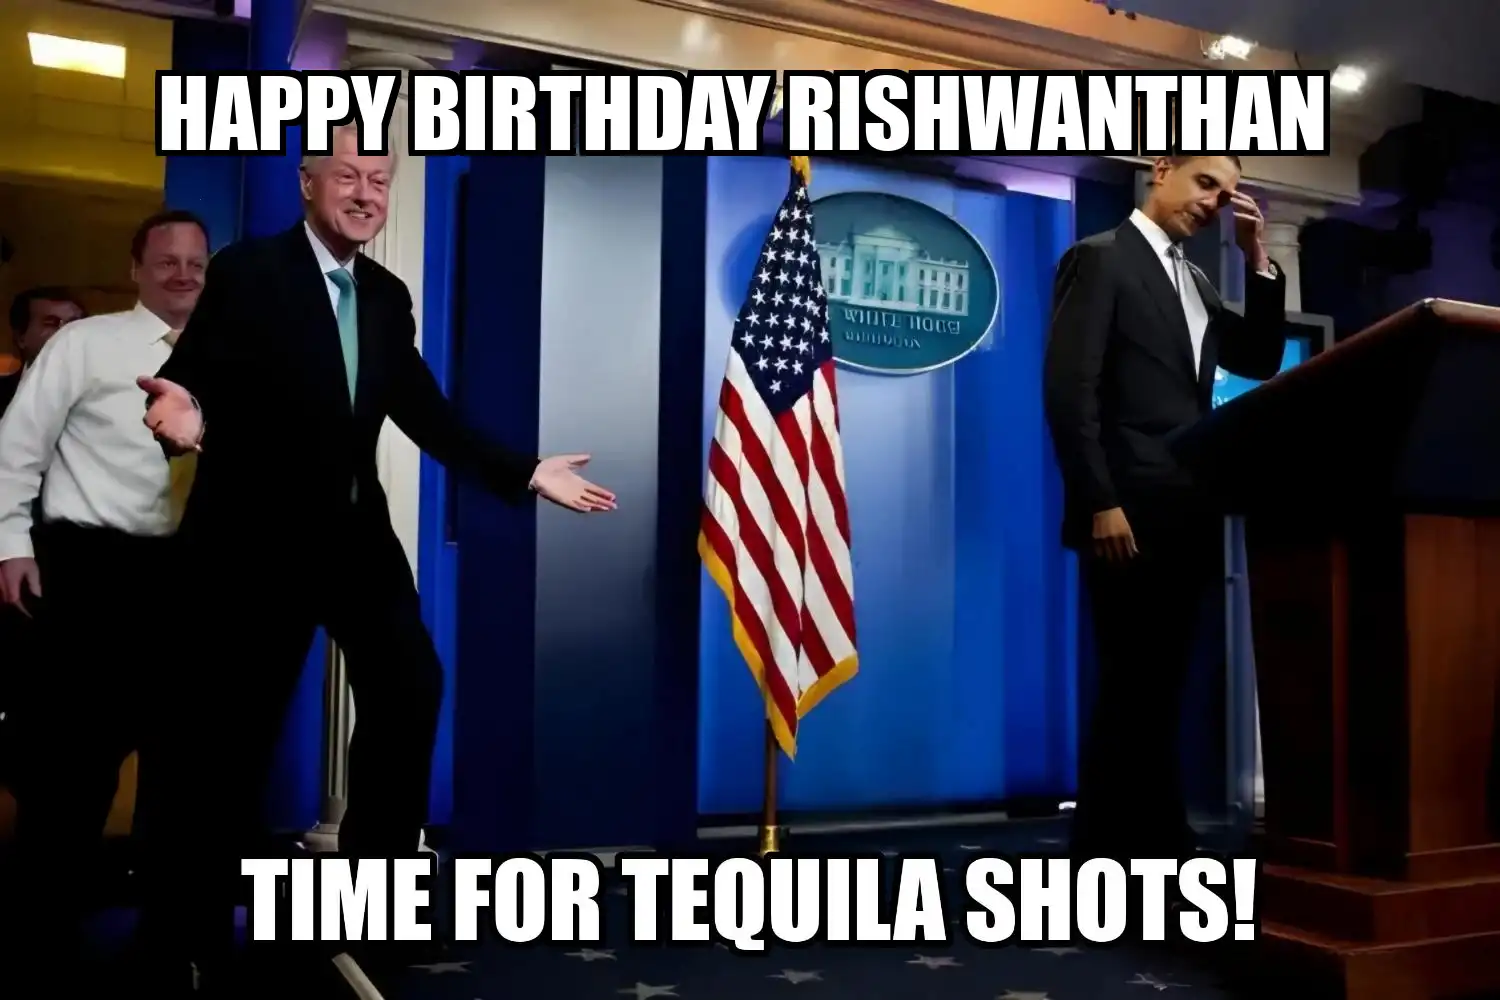 Happy Birthday Rishwanthan Time For Tequila Shots Memes